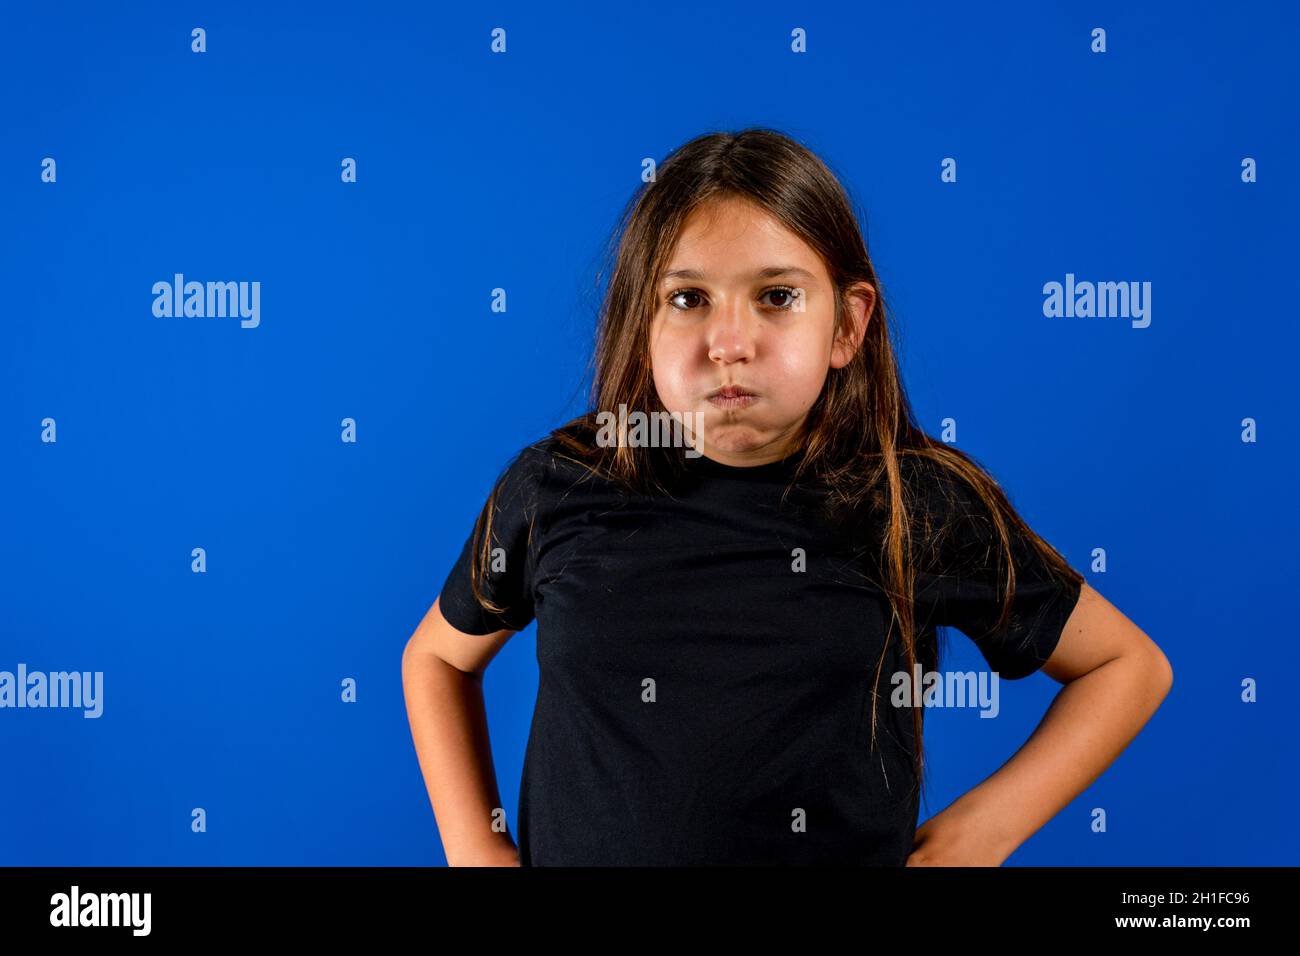 The little girl puffed out his cheeks isolated on blue studio background. Gesture concept Stock Photo